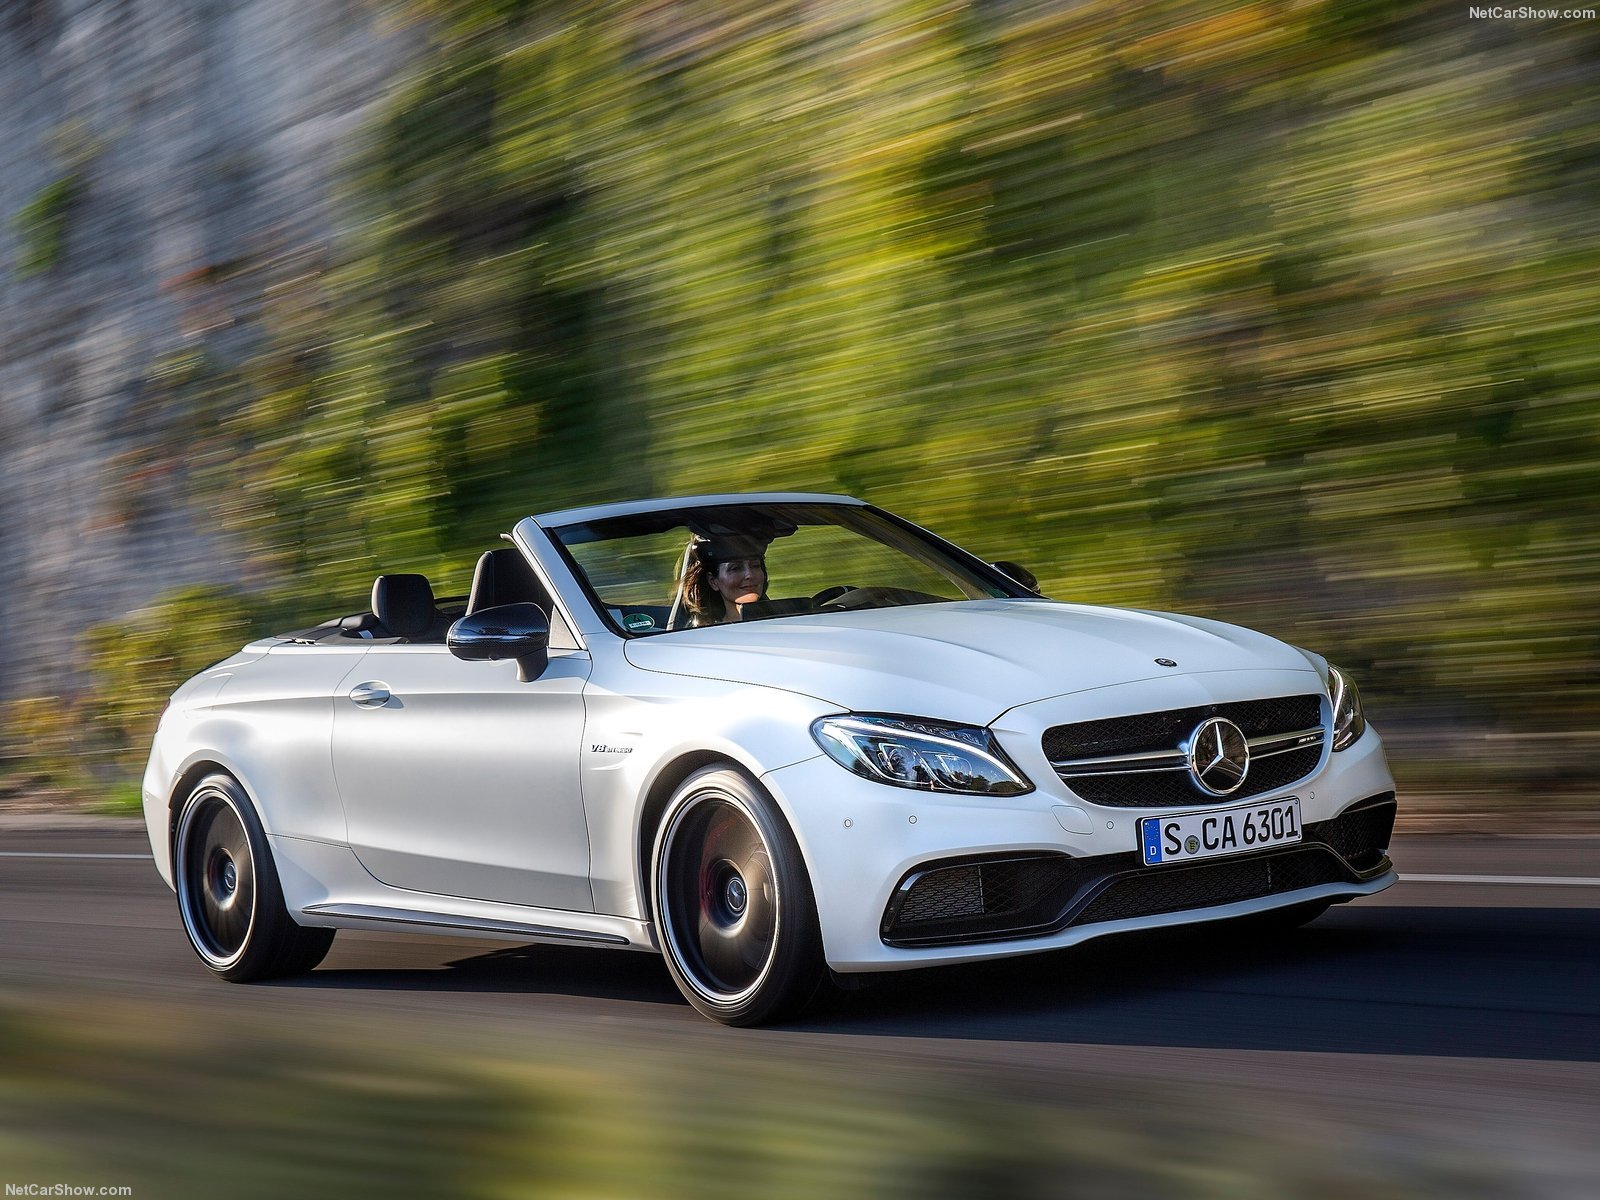 2016, Amg, Benz, C63, Cabriolet, Cars, Mercedes, White Wallpapers HD ...